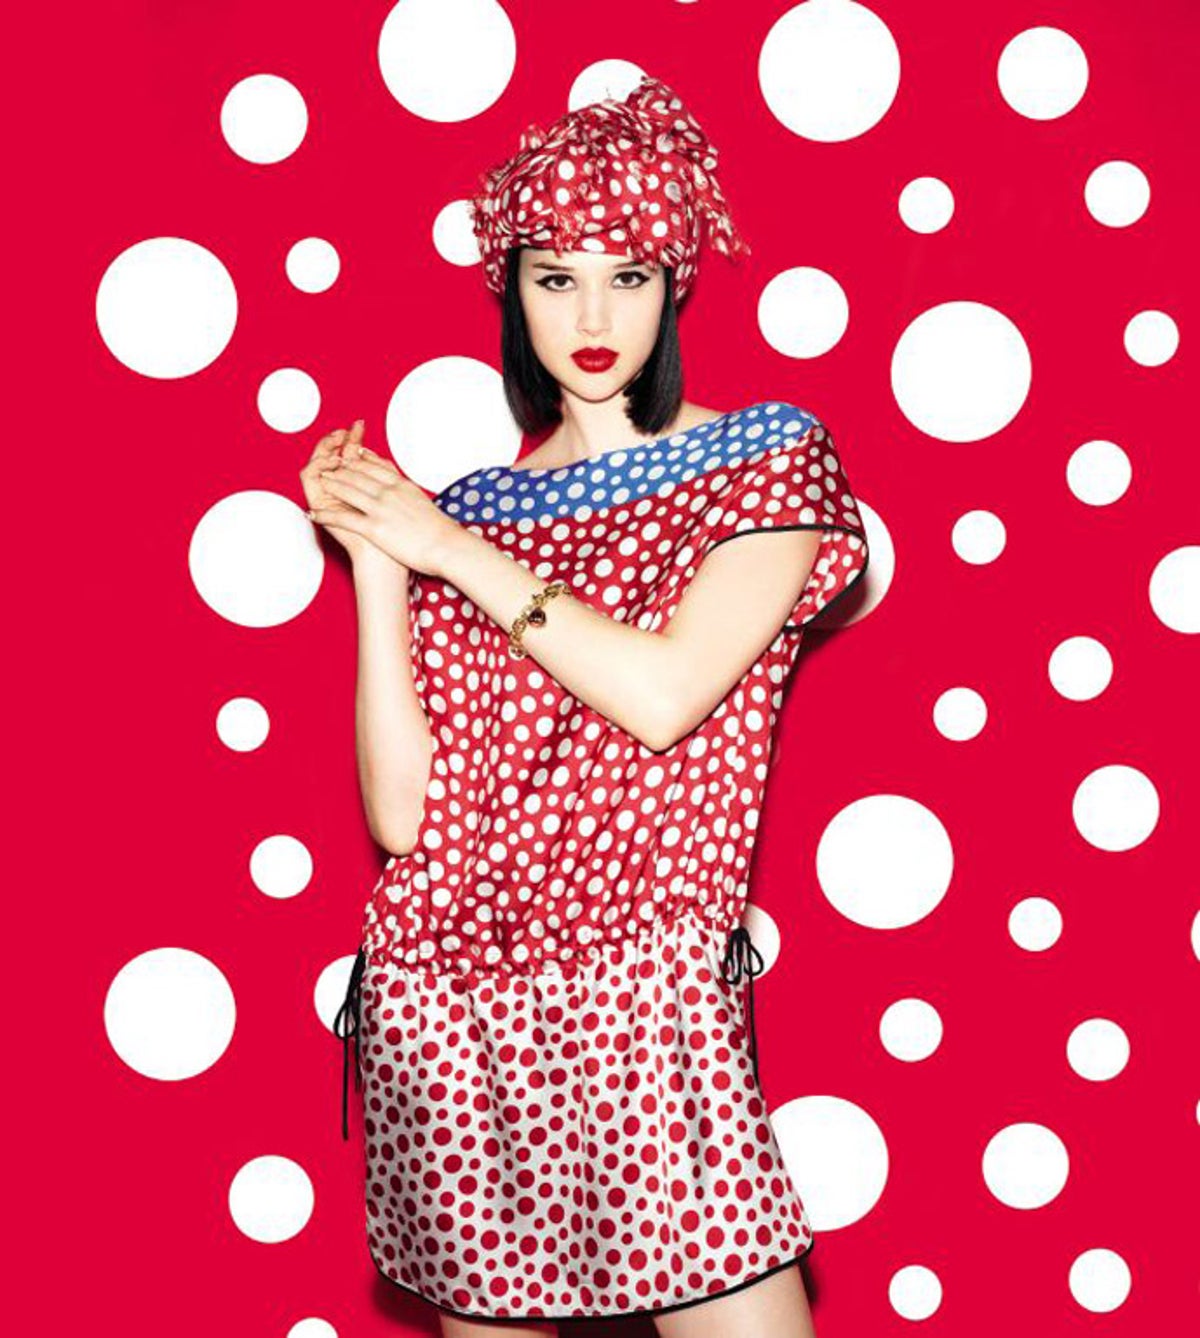 Art and Fashion: The many collaborations for Louis Vuitton by Marc